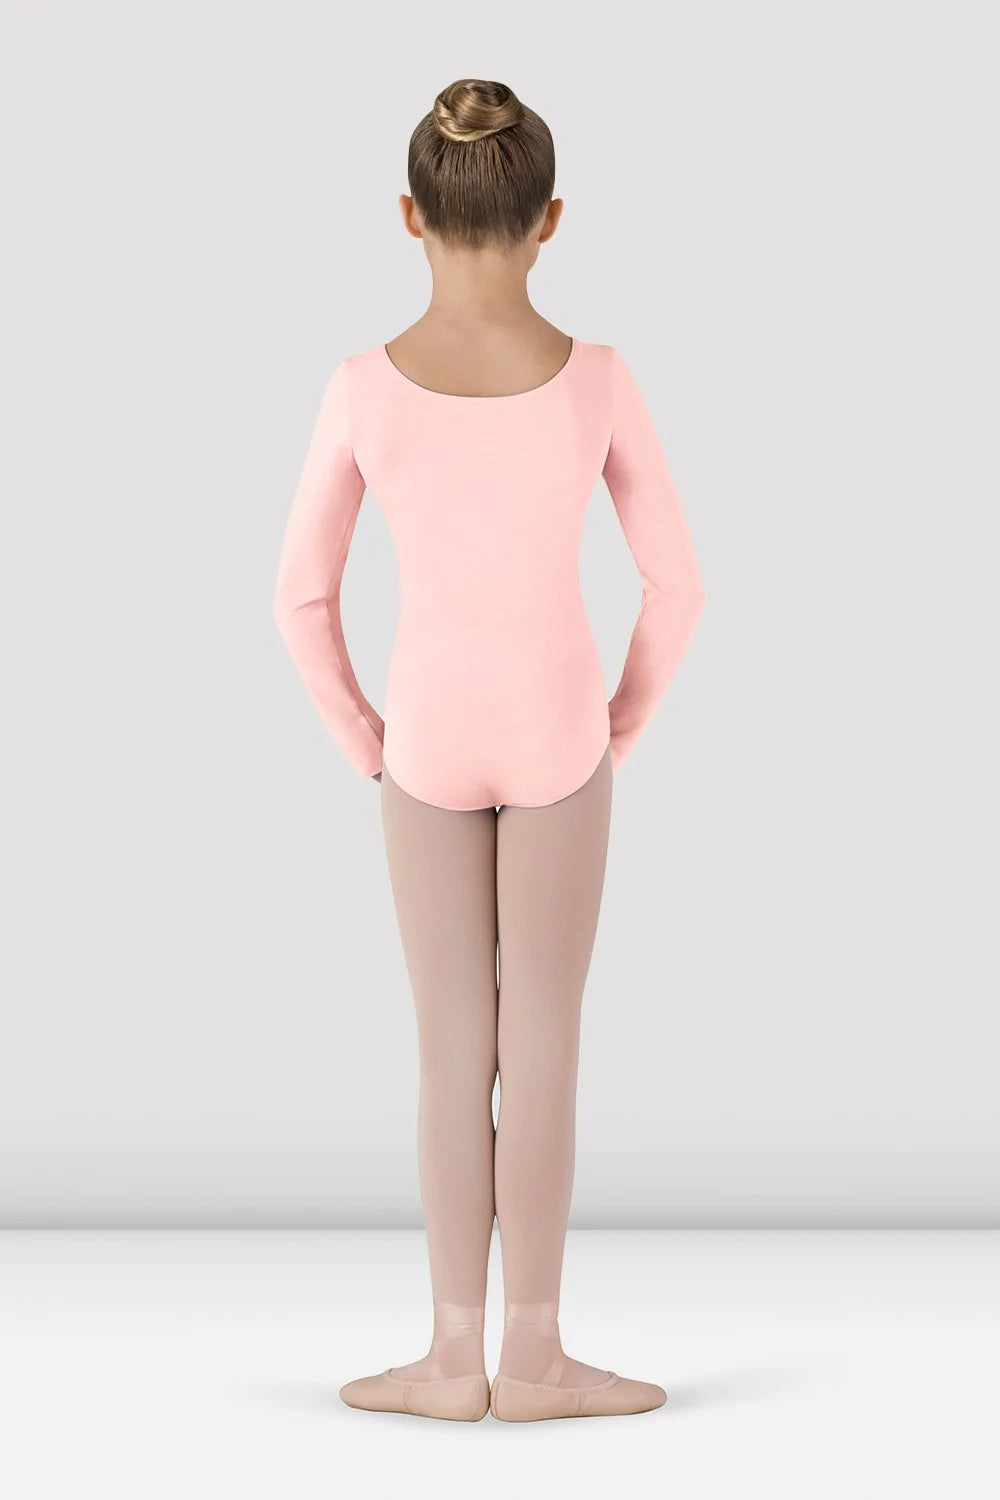 Cotton Long Sleeve Leotard - Youth